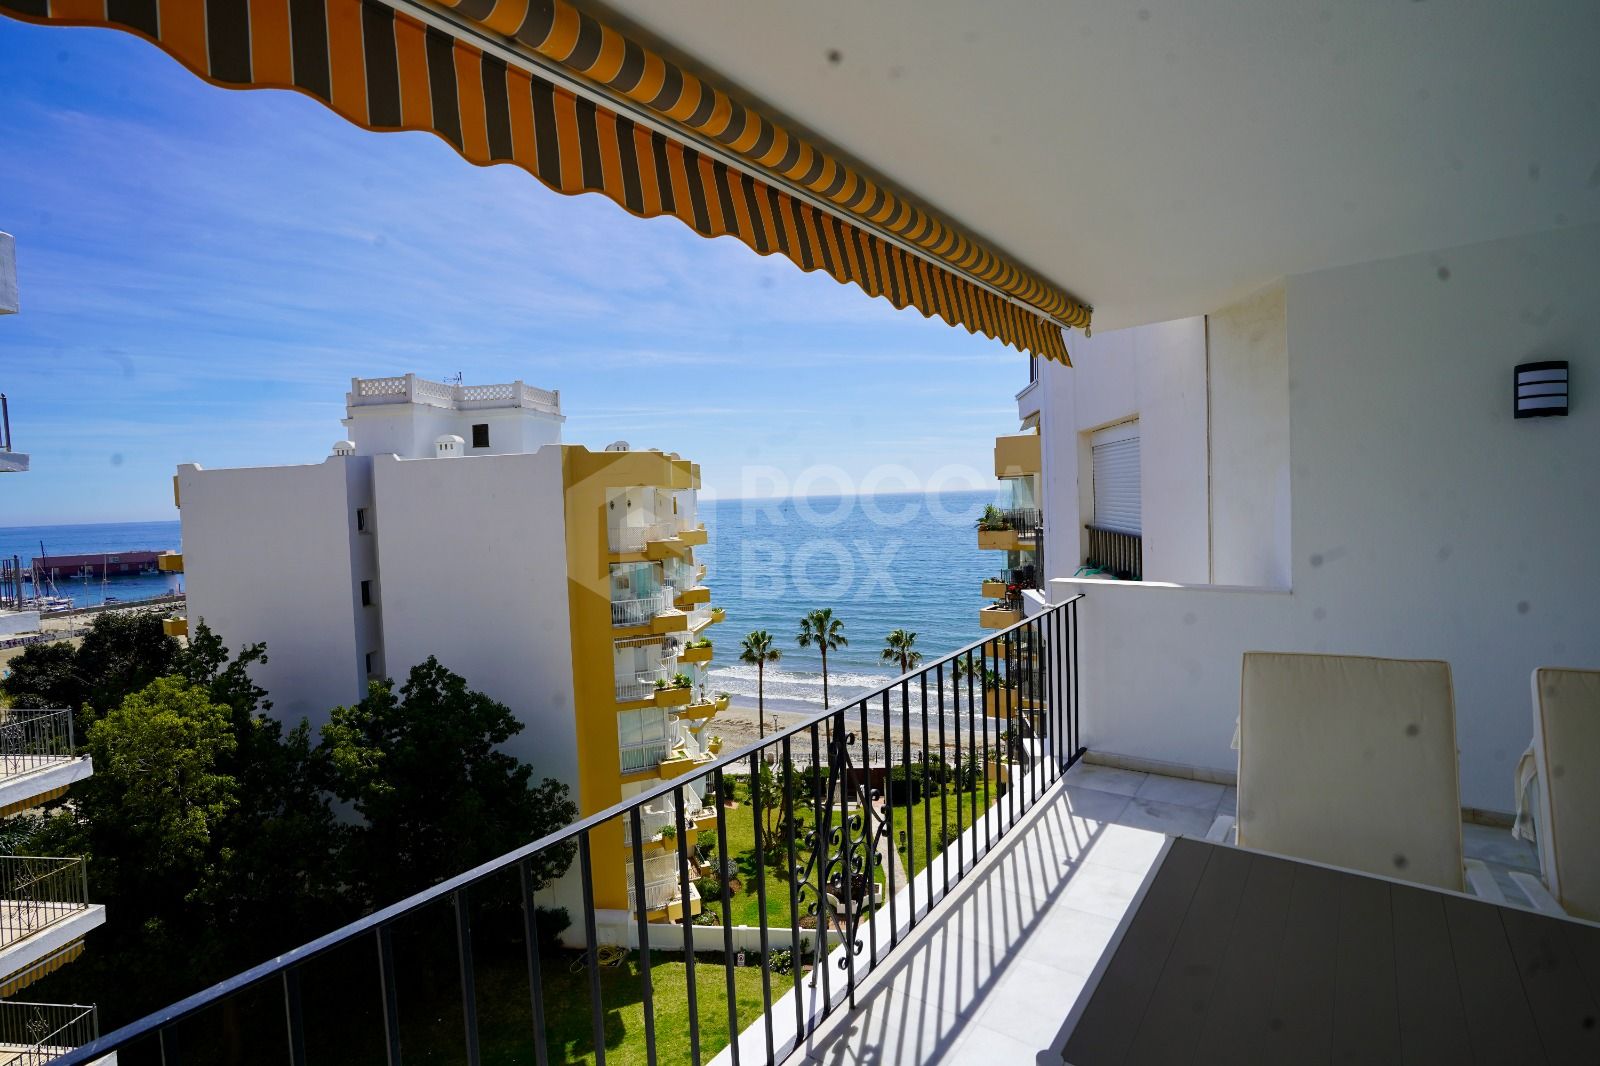 Luxury 3 Bedroom Apartment with Sea View in Marbella